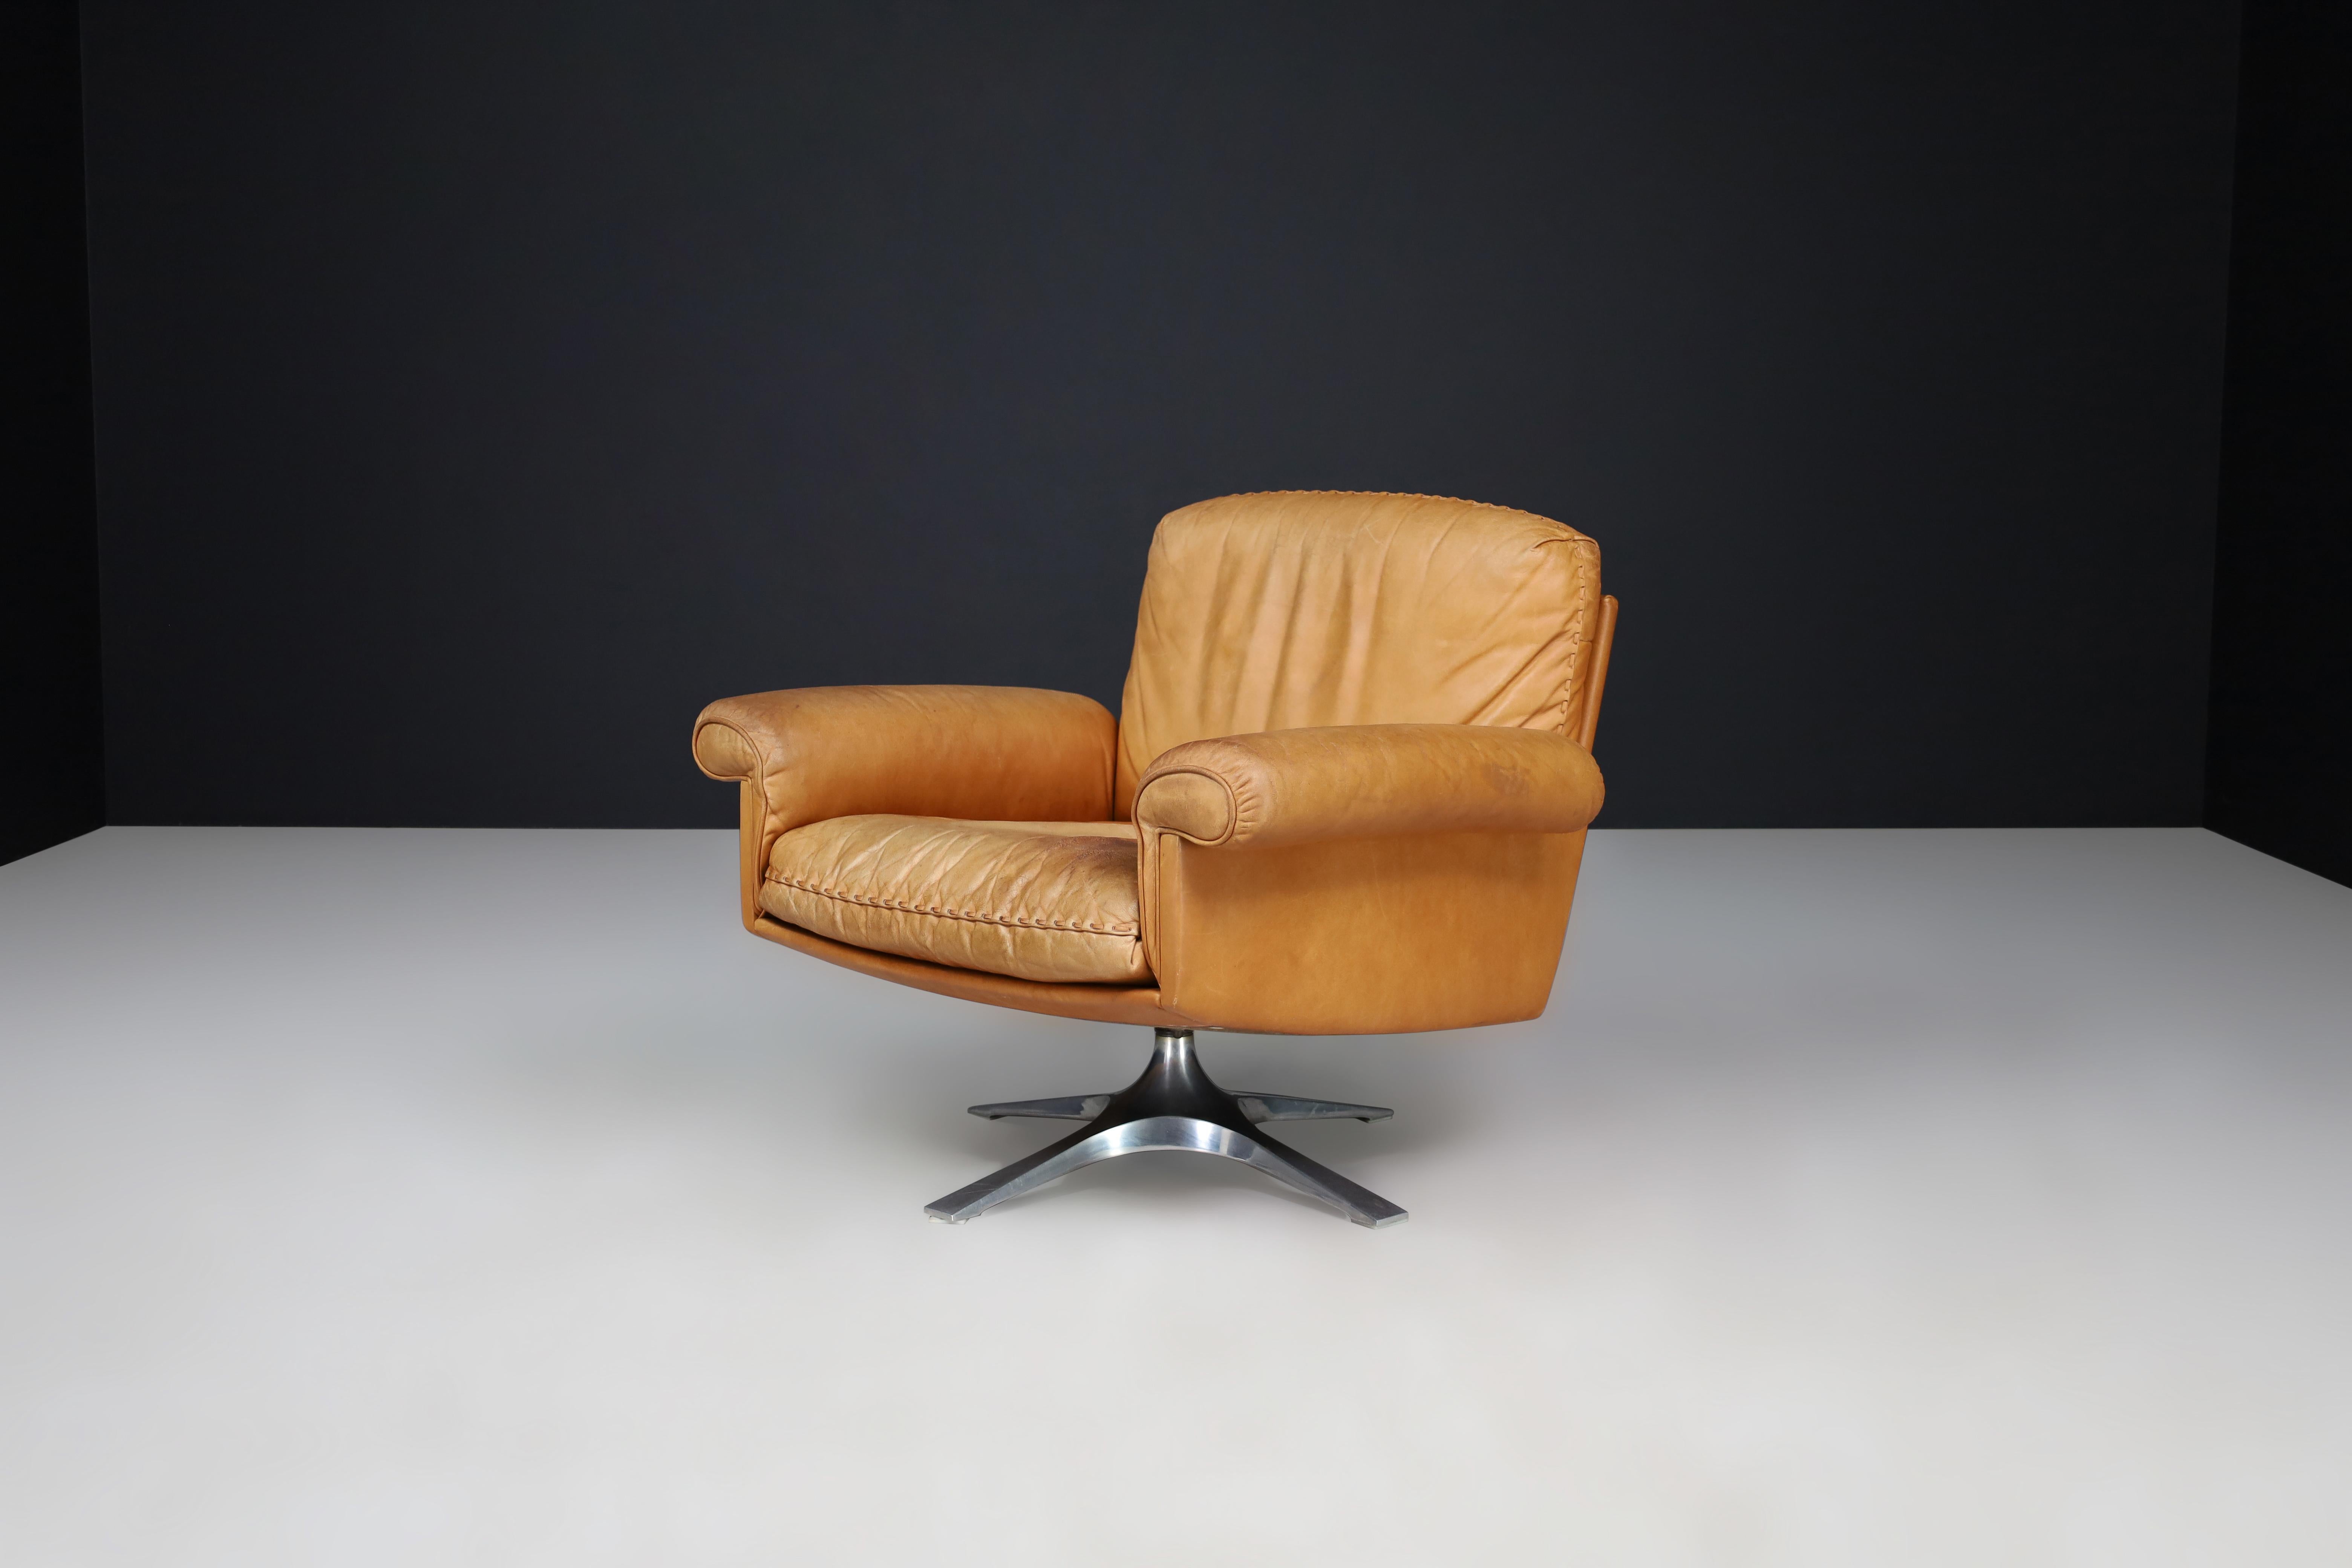 De Sede DS-31 lounge chair in Patinated Cognac Brown Leather, Switzerland 1970s

The DS-31 lounge chair by De Sede is a high-quality piece of furniture made from fine leather and chrome-plated metal. It was produced in Switzerland during the 1970s,